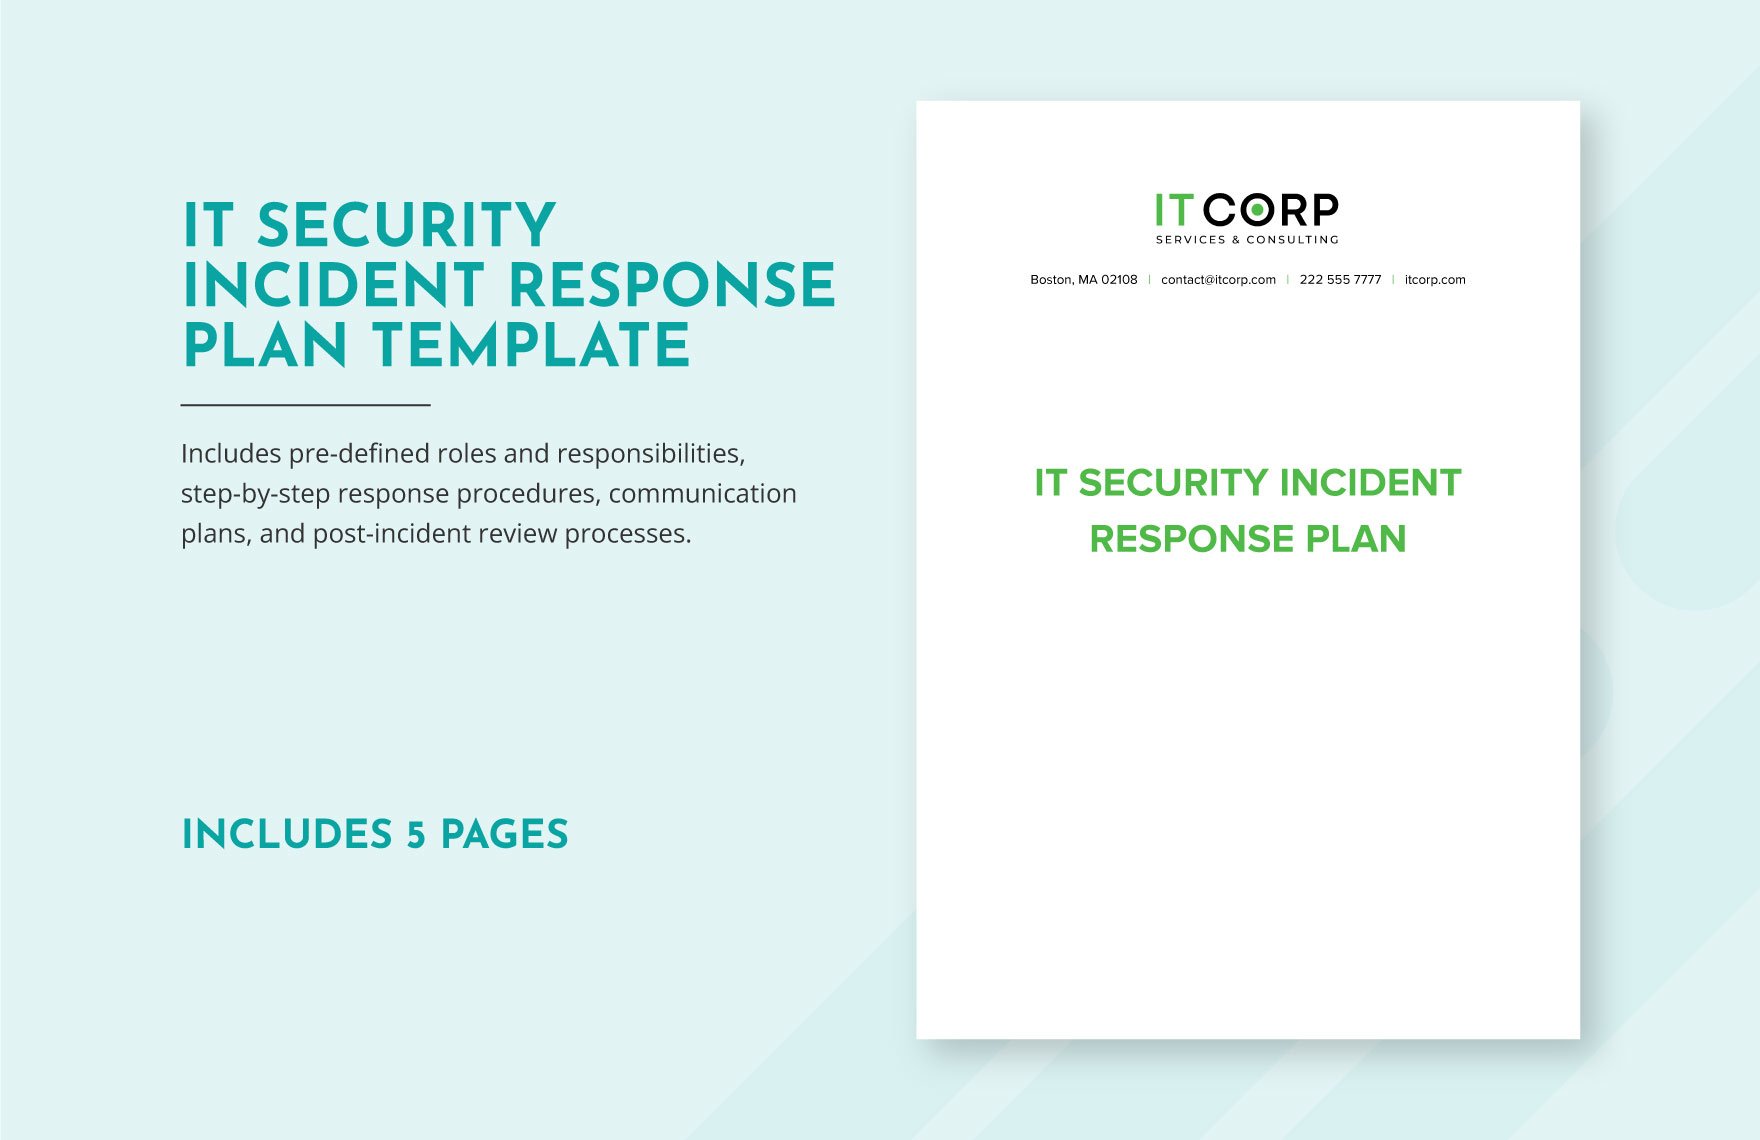 IT Security Incident Response Plan Template in Word, Google Docs, PDF